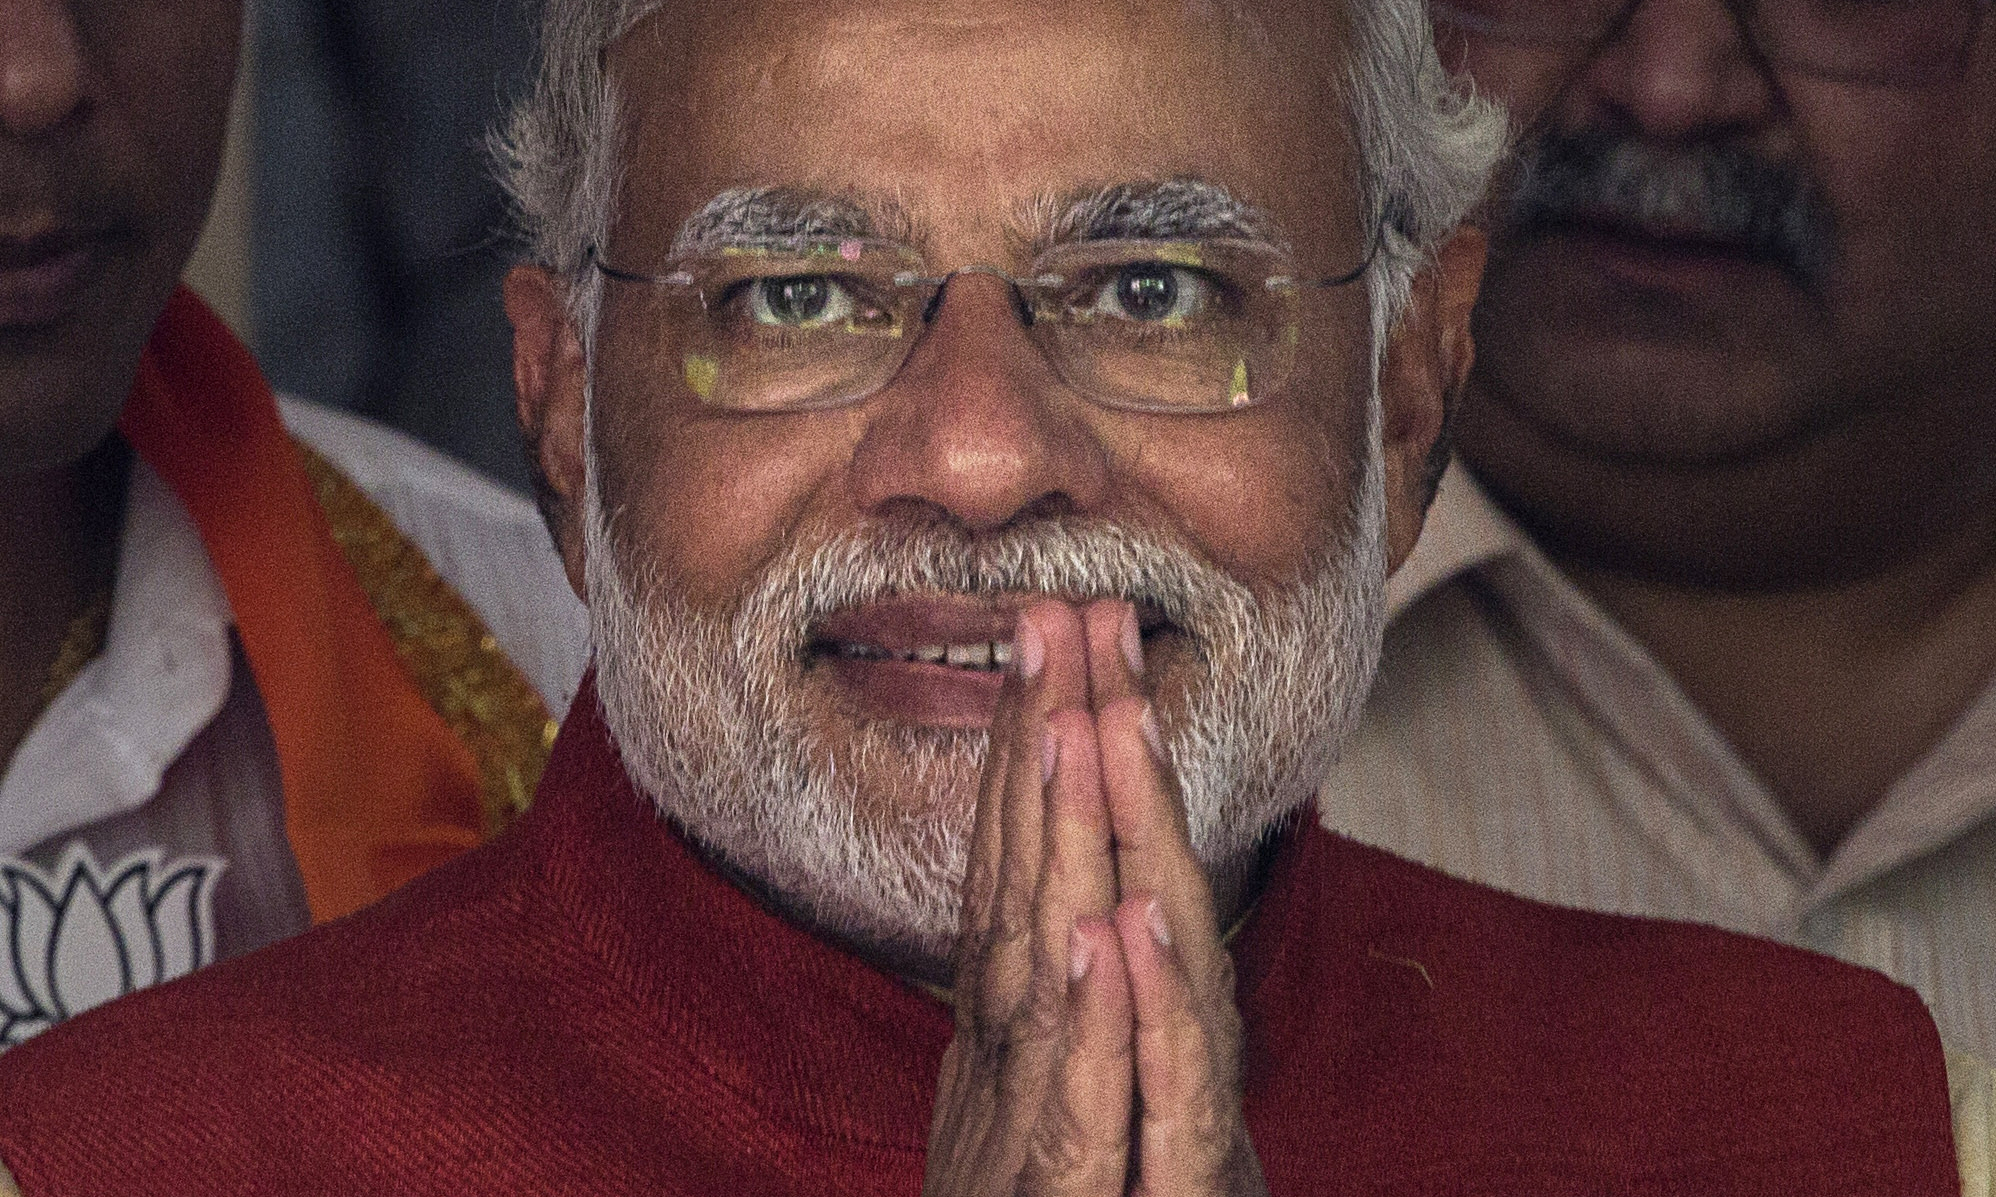 Modi is reaching out to India's Muslims – and they may vote for him